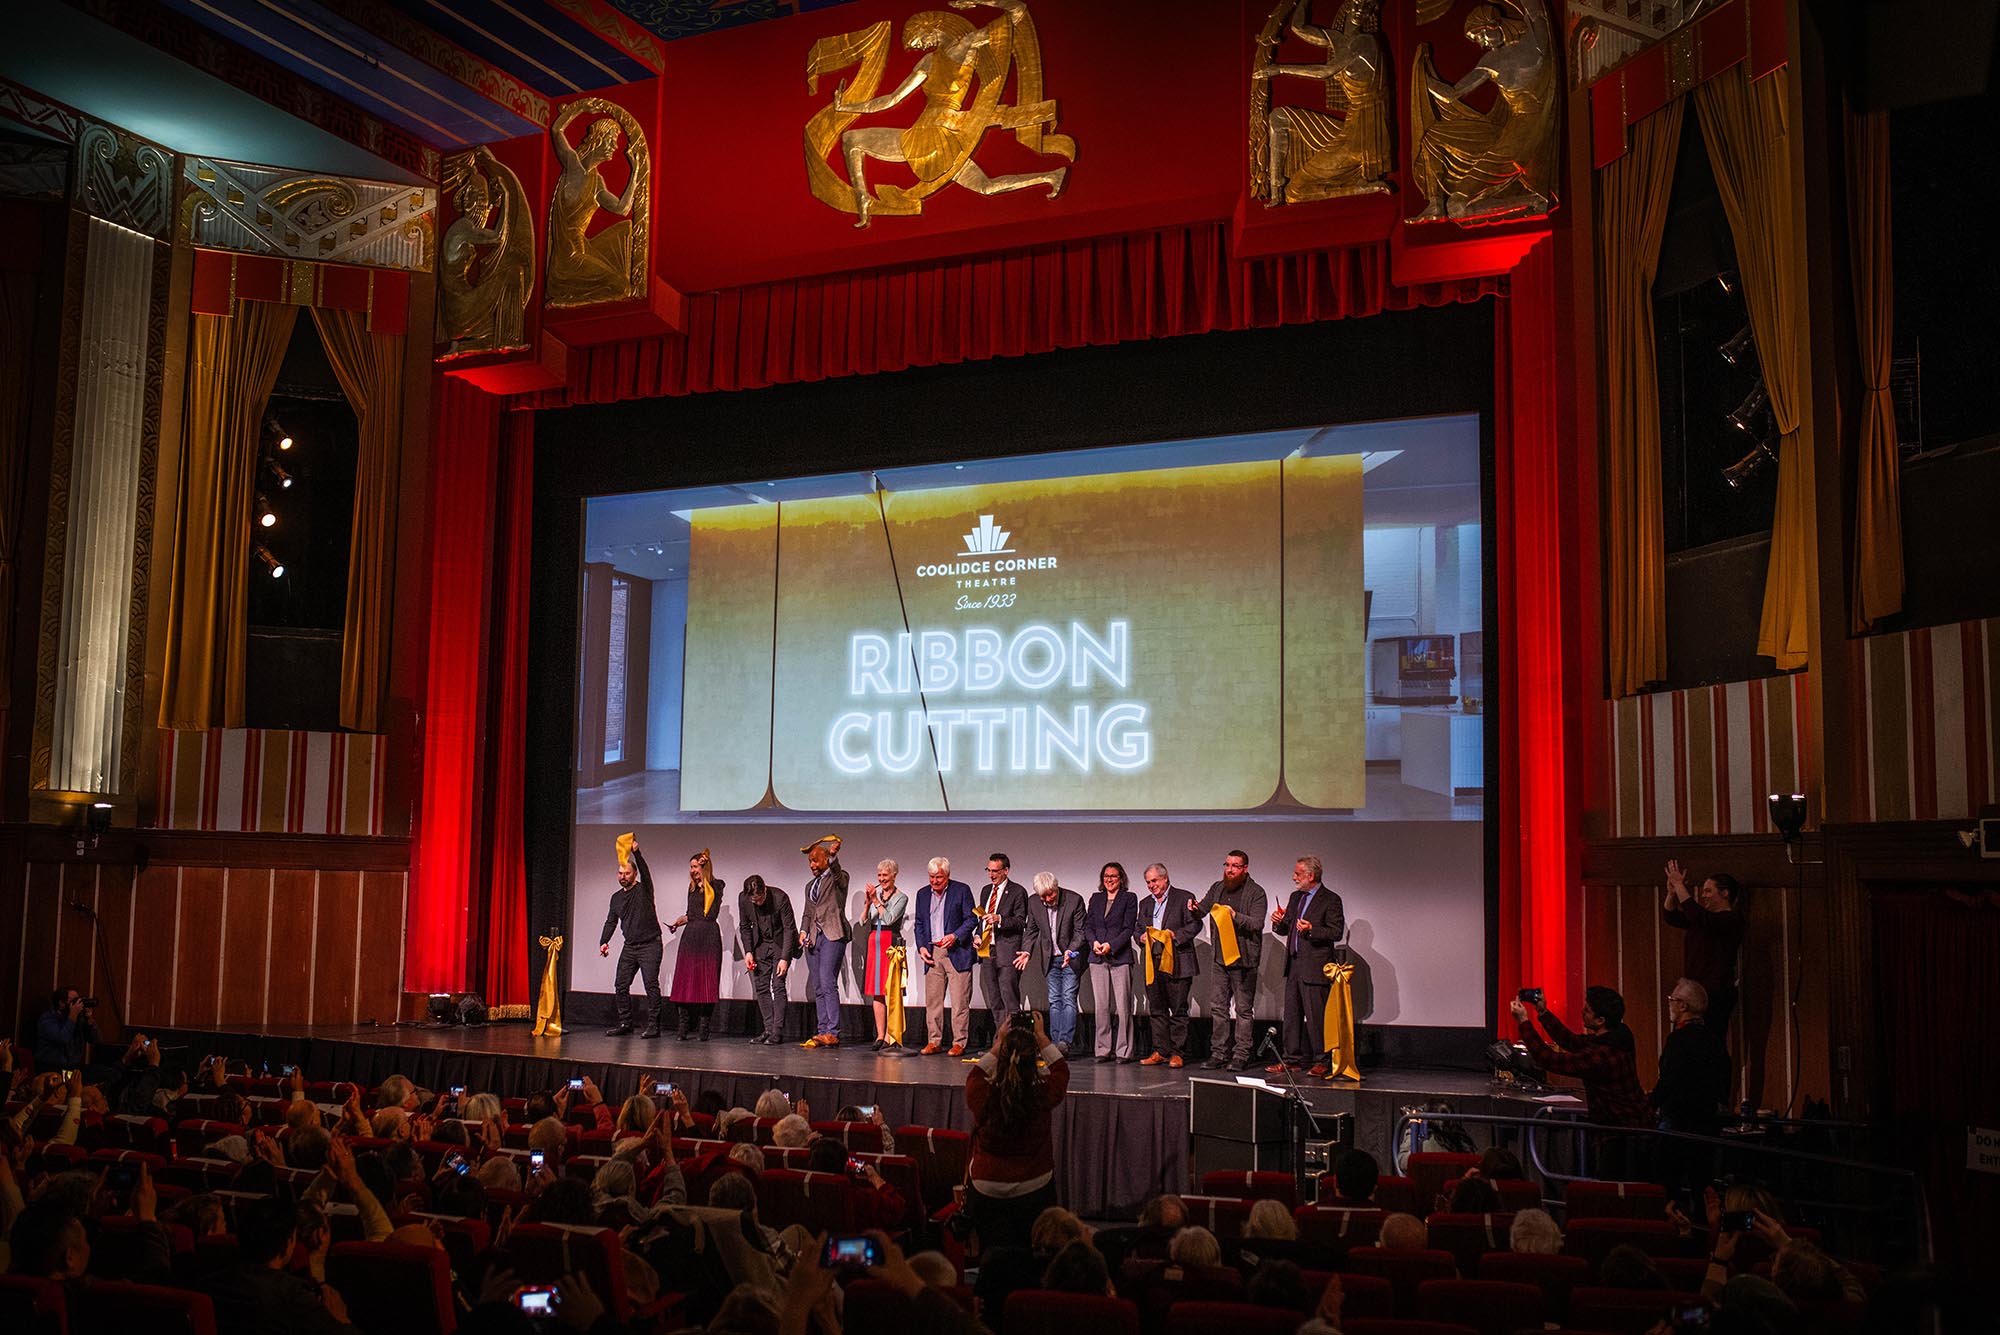 Photo: A picture of a stage with many people on it, all holding pieces of ribbon. There is a projection on the back of the stage that says "Coolidge Corner Theater, Since 1933, Ribbon Cutting"